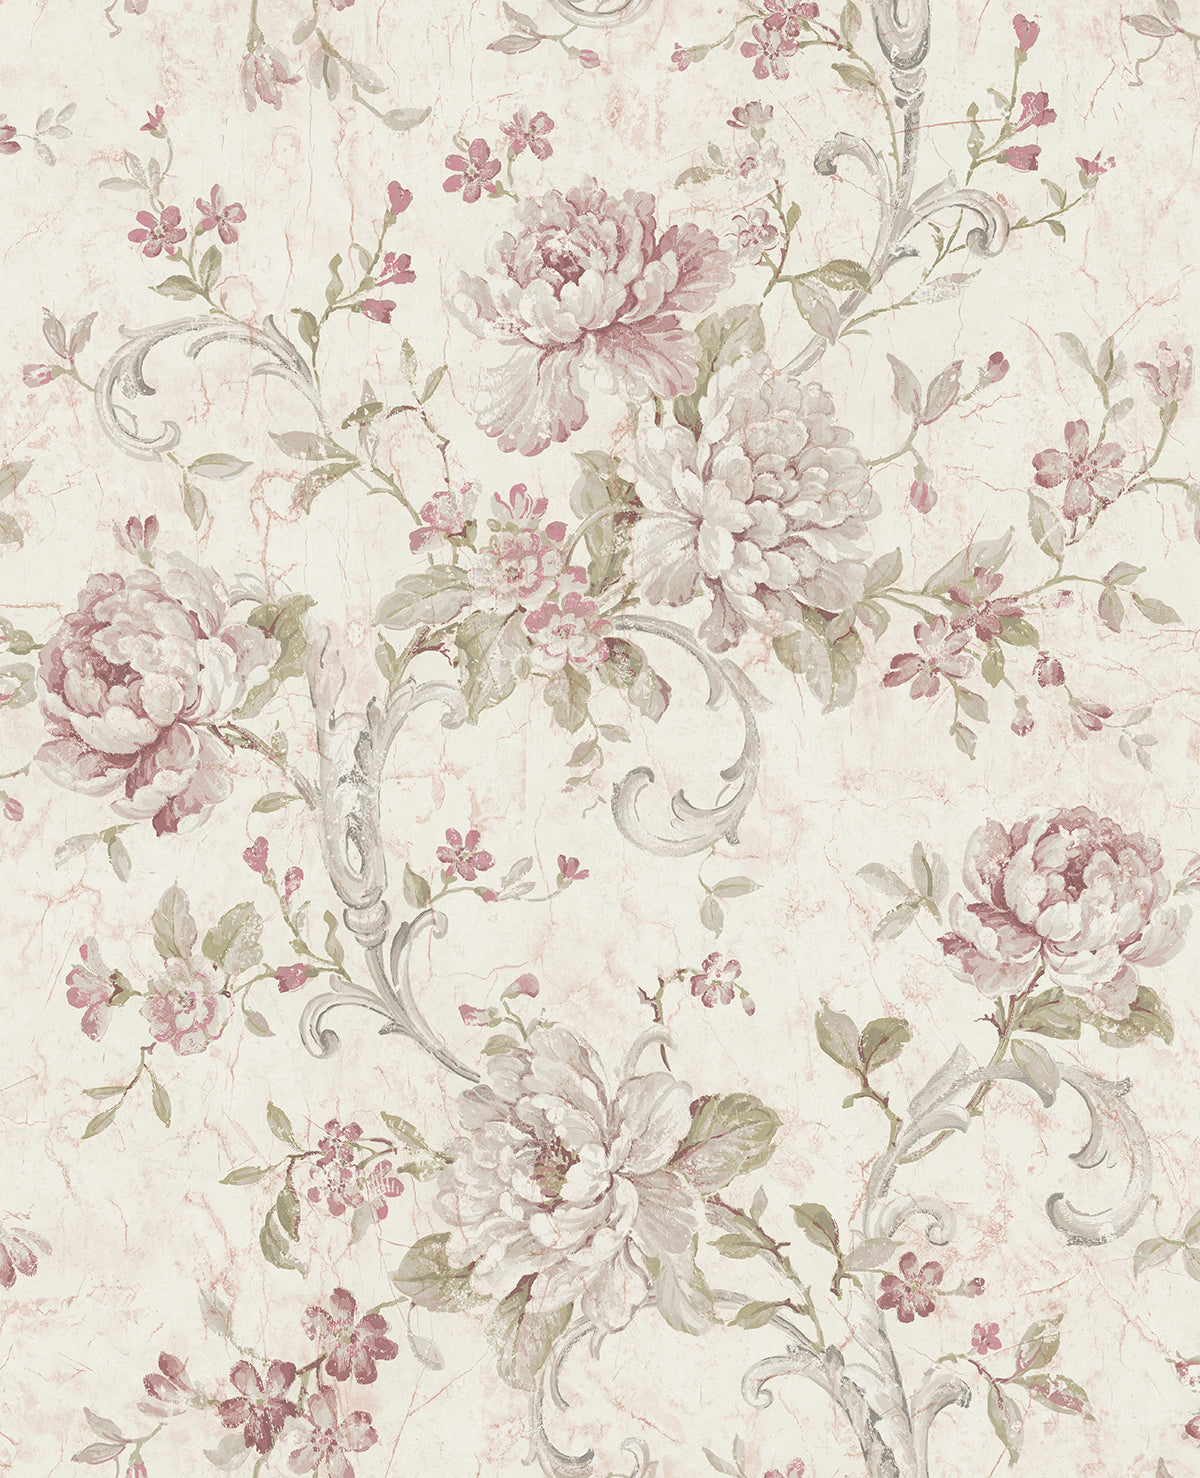 Antiqued Rose Wallpaper In Dusty Mauve From The Vintage Home 2 Collect Burke Decor